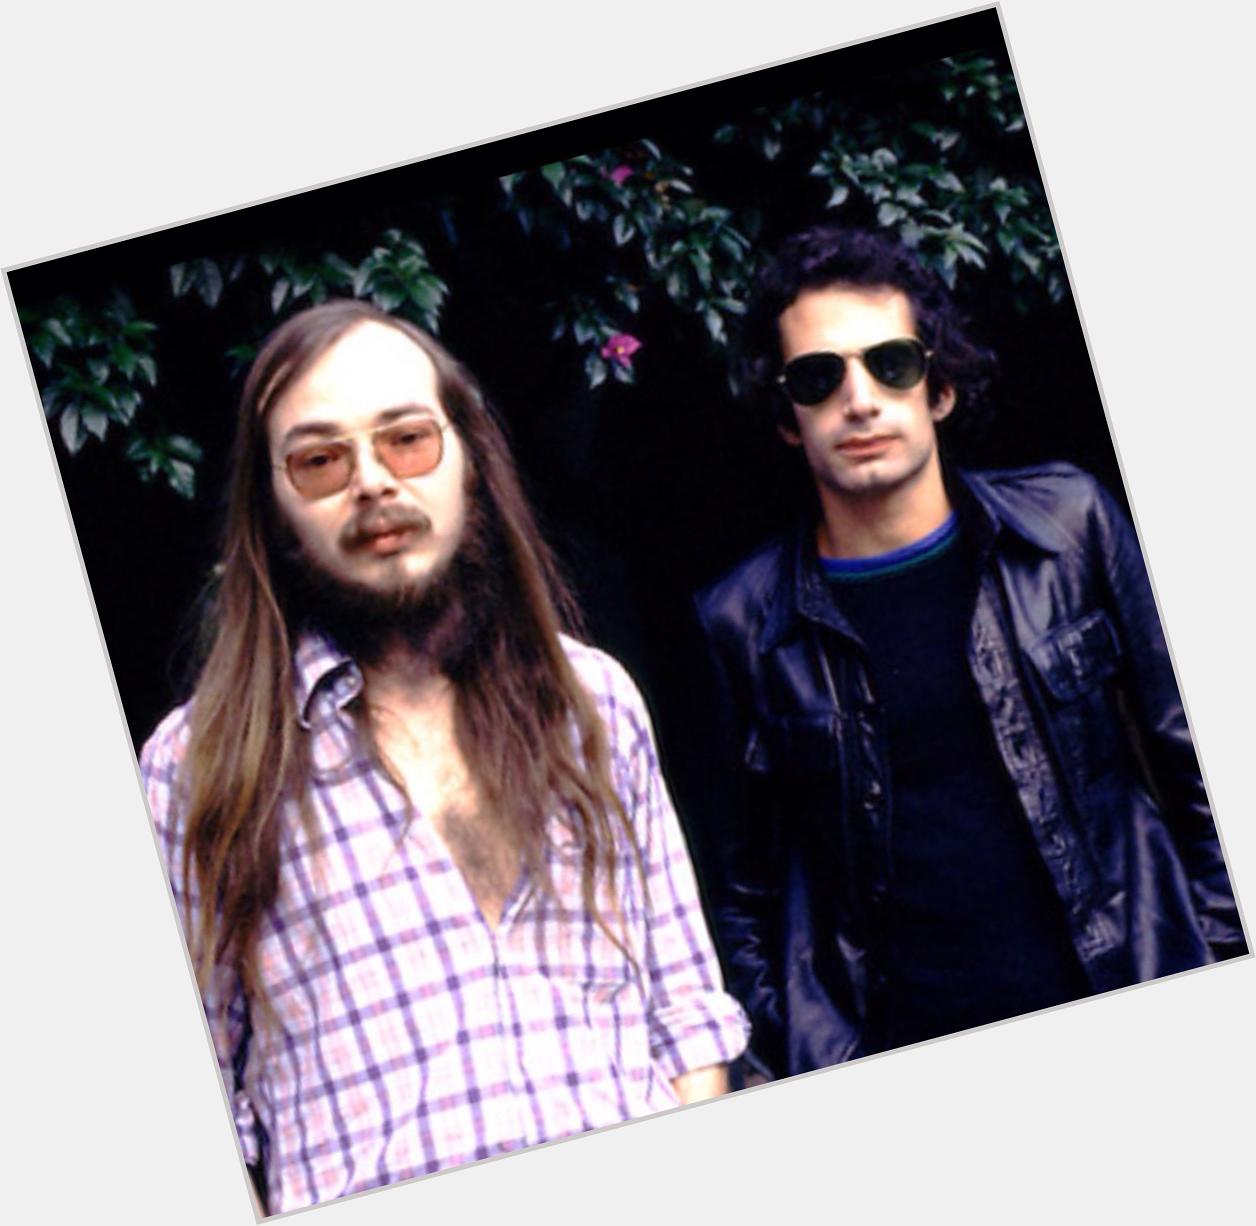 2/20/1950 Happy Birthday, Walter Becker, co-founder, co-songwriter,
guitarist and bassist of Steely Dan 